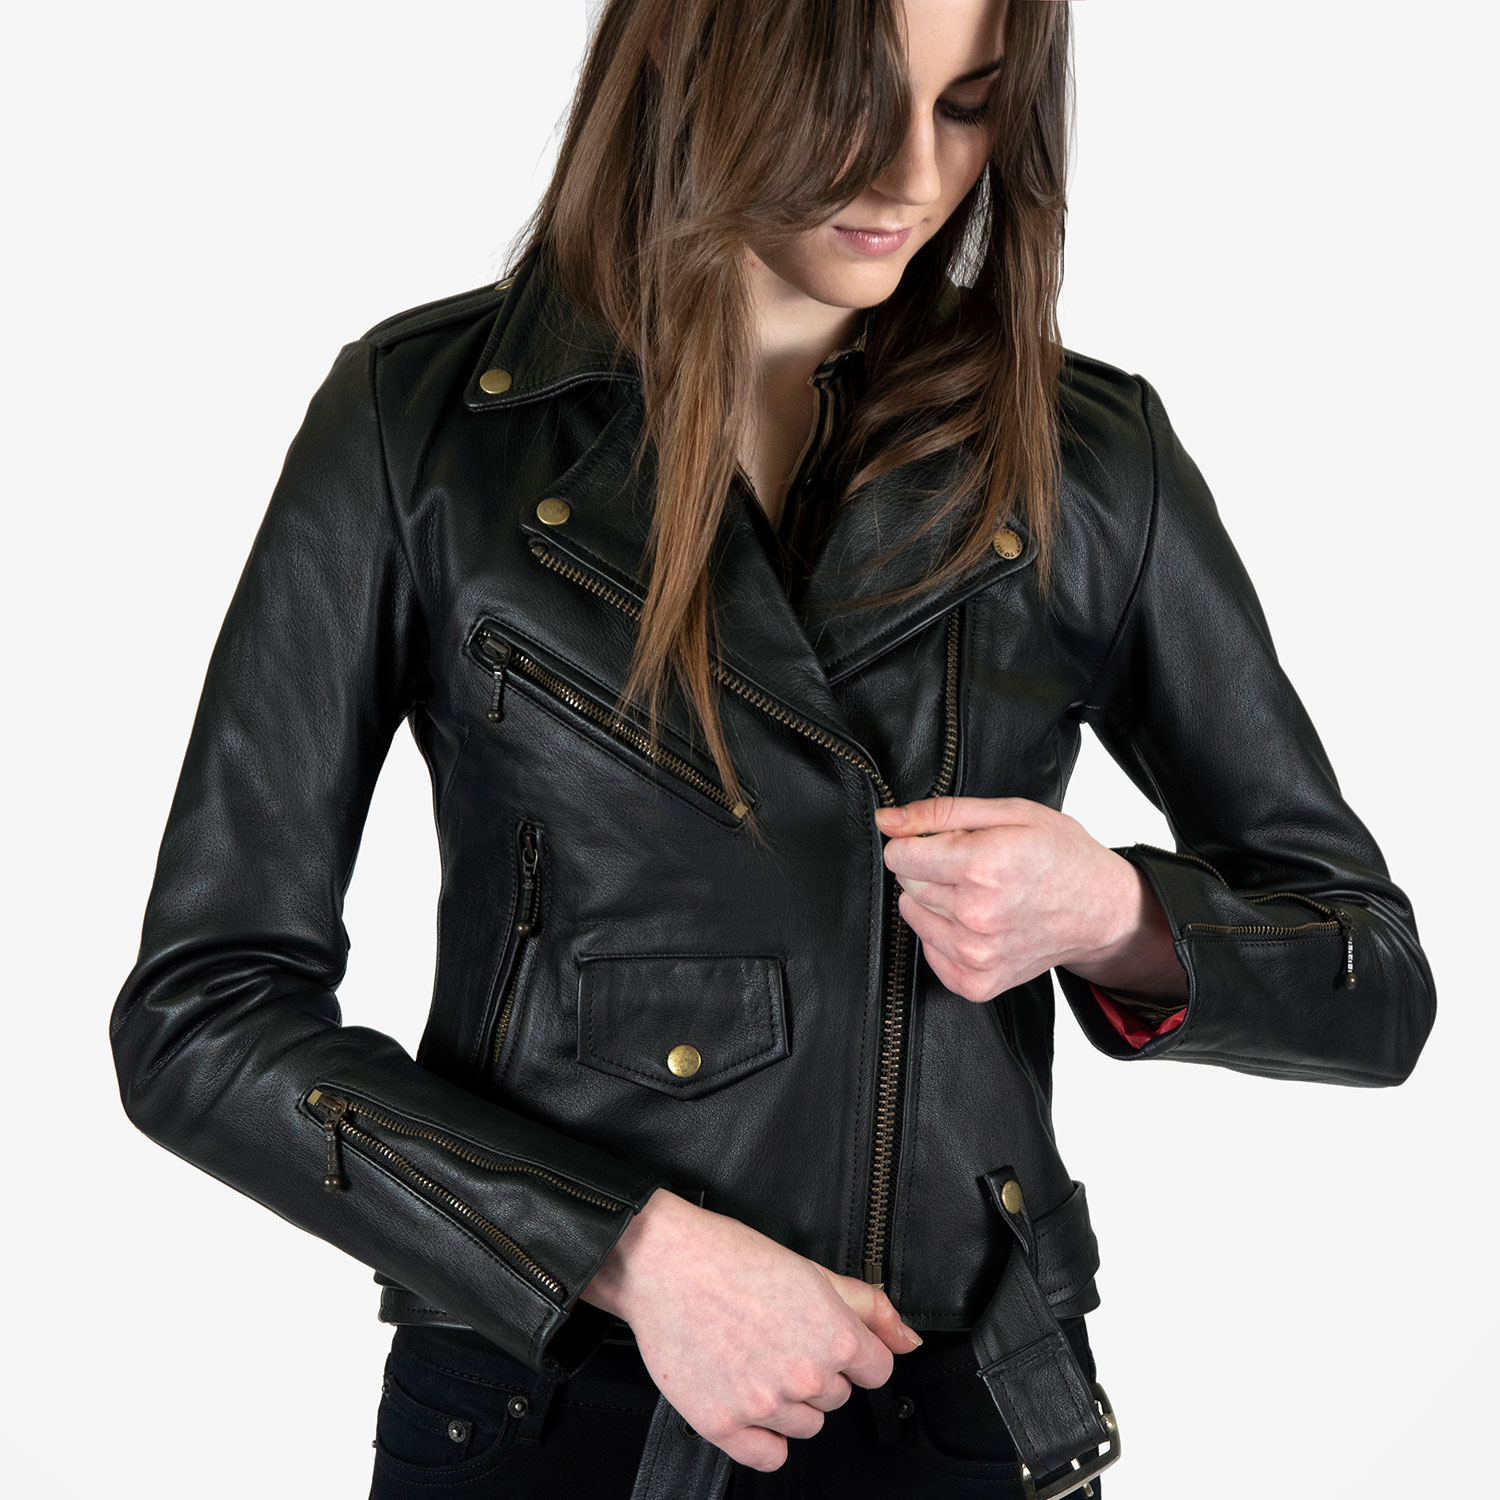 Straight to Hell Women's Commando Leather Jacket